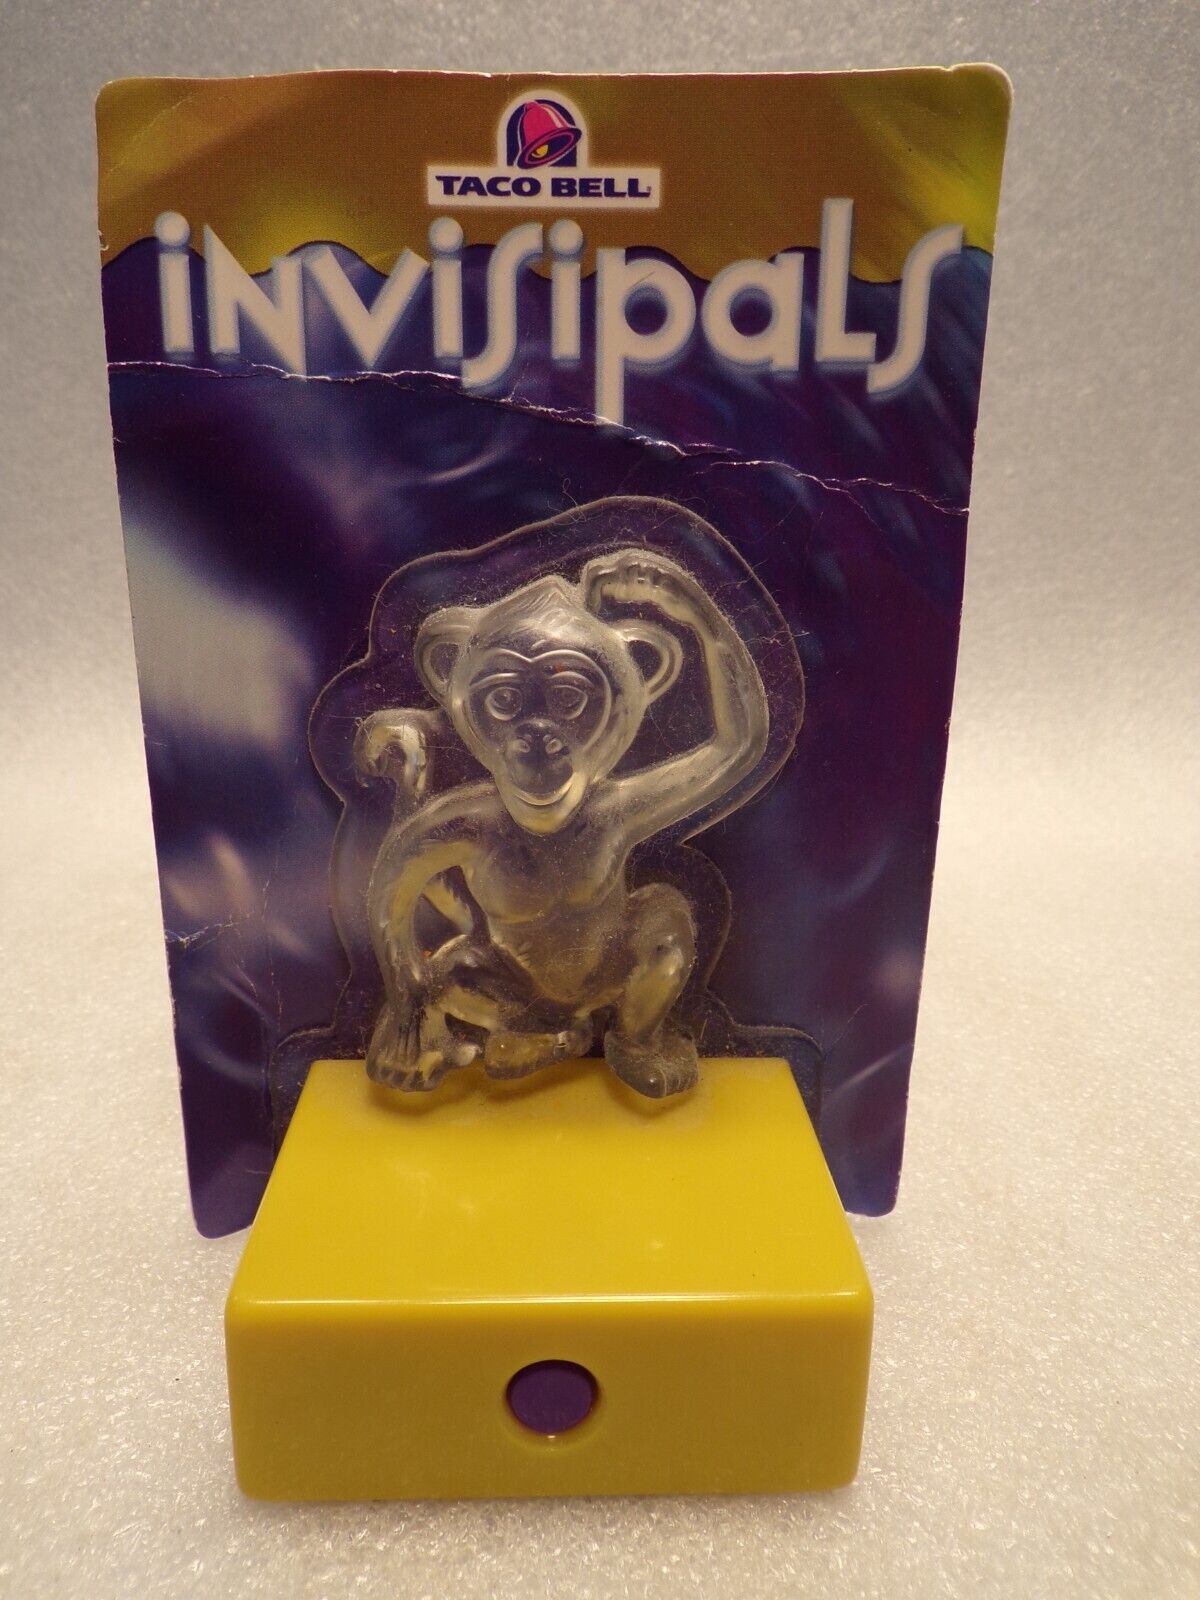 TACO BELL 2003 INVISIPAL SQUEALING MONKEY TOY SEALED IN PACKAGE + WORKING BUTTON